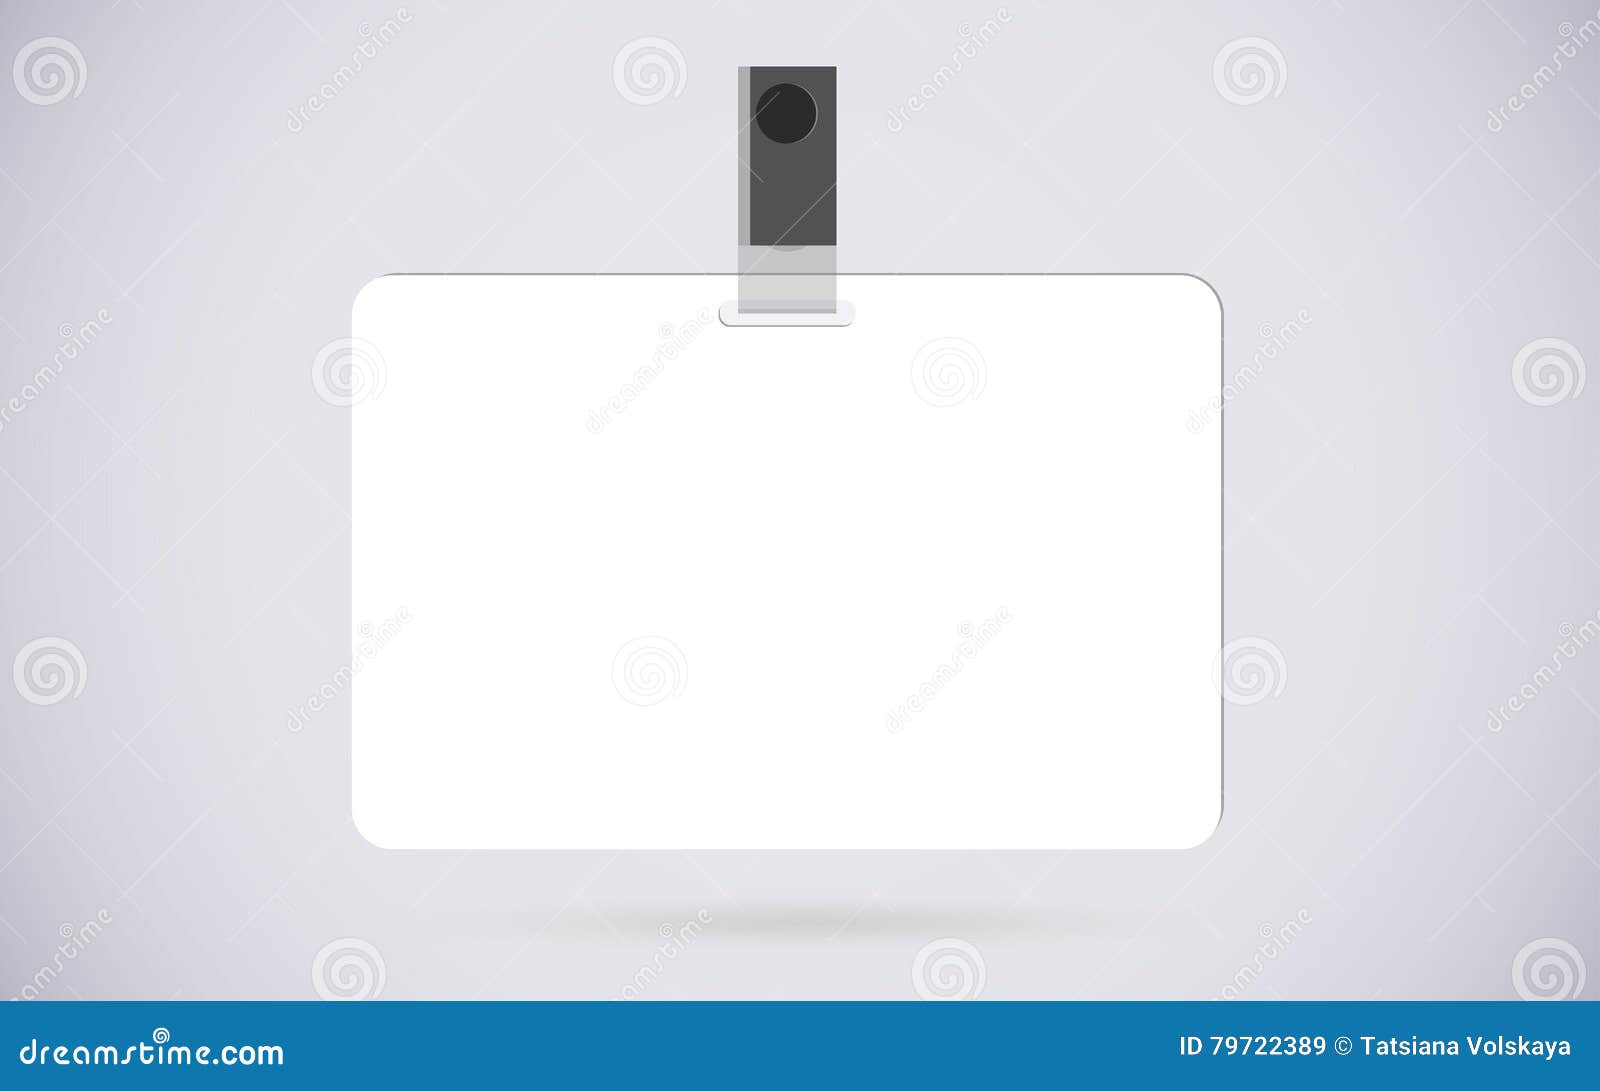 Empty Pin Badge Template Stock Illustration - Download Image Now